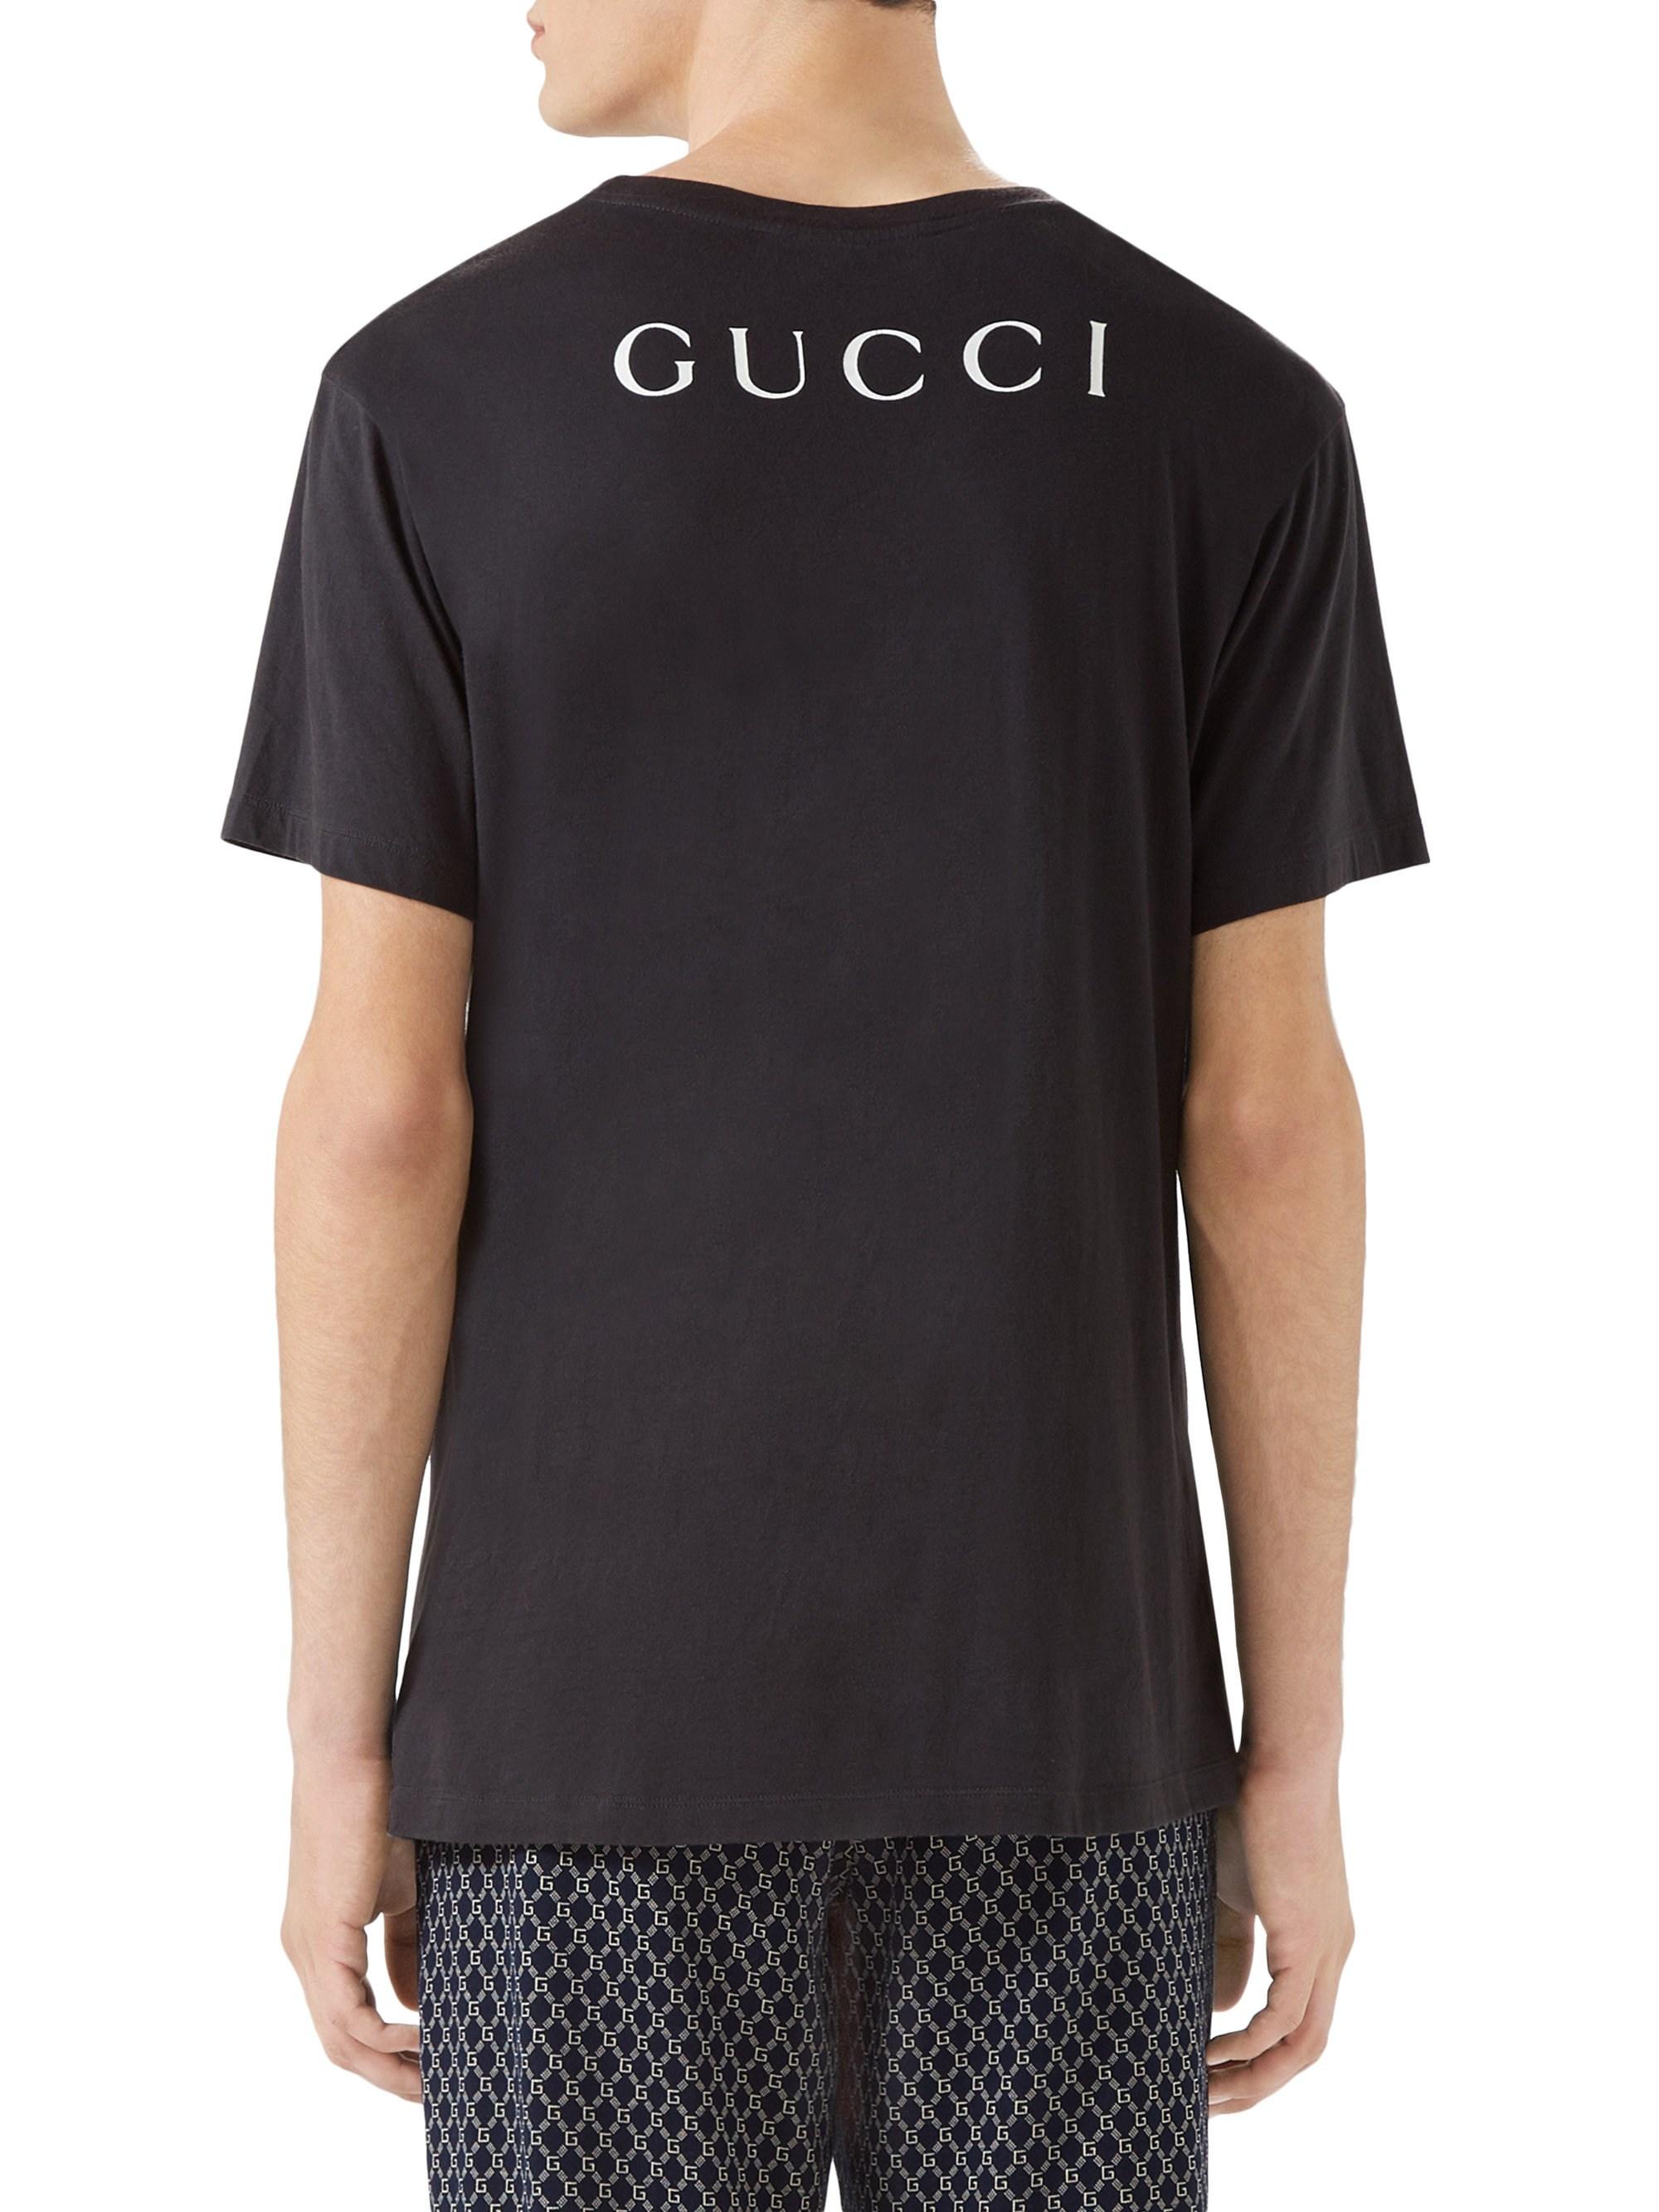 Gucci Oversize T-shirt With Metal Print in Black for Men | Lyst